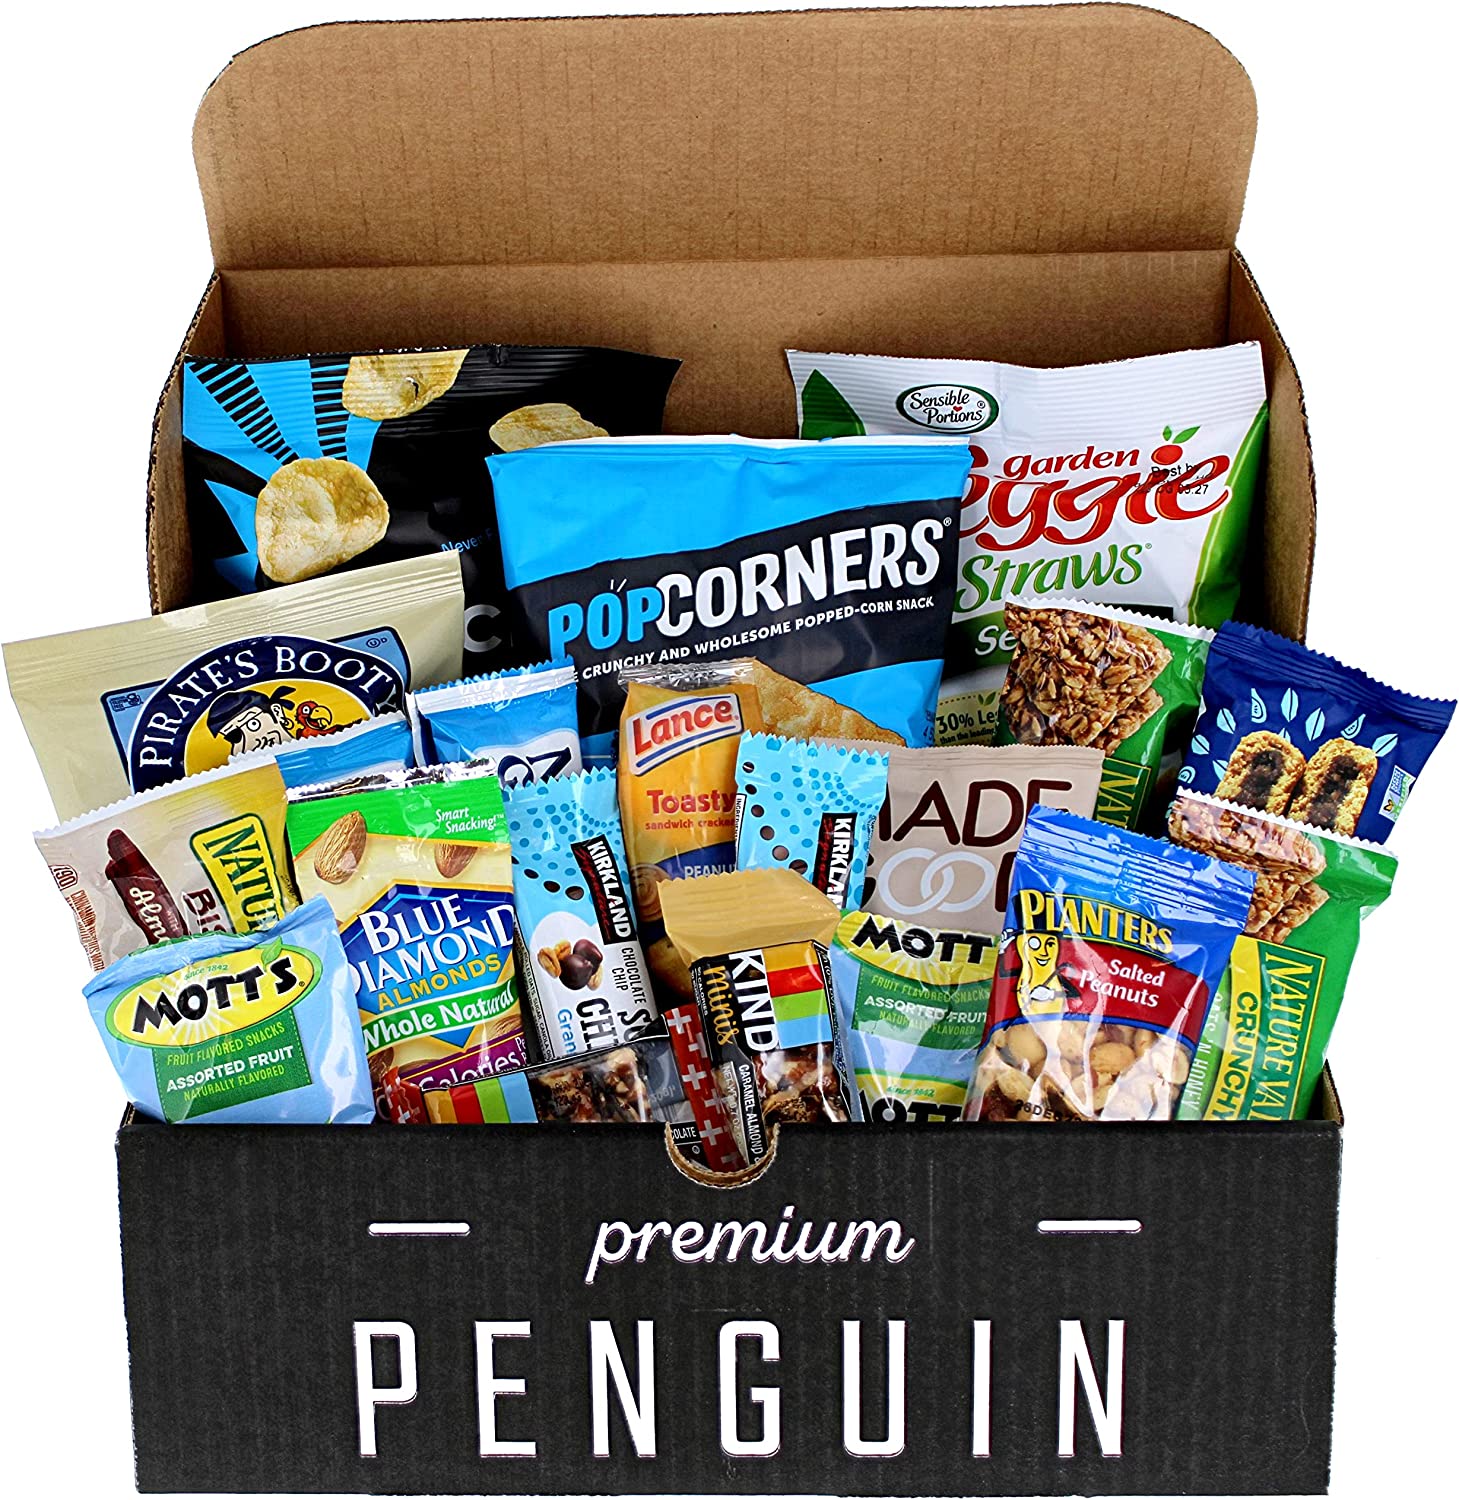 Premium Penguin Healthy Snacks Care Package – (20 Count Variety Snack Pack) An Assortment of Popcorn, Fruit Snacks, Nuts, Bars, Healthy Chips and More!